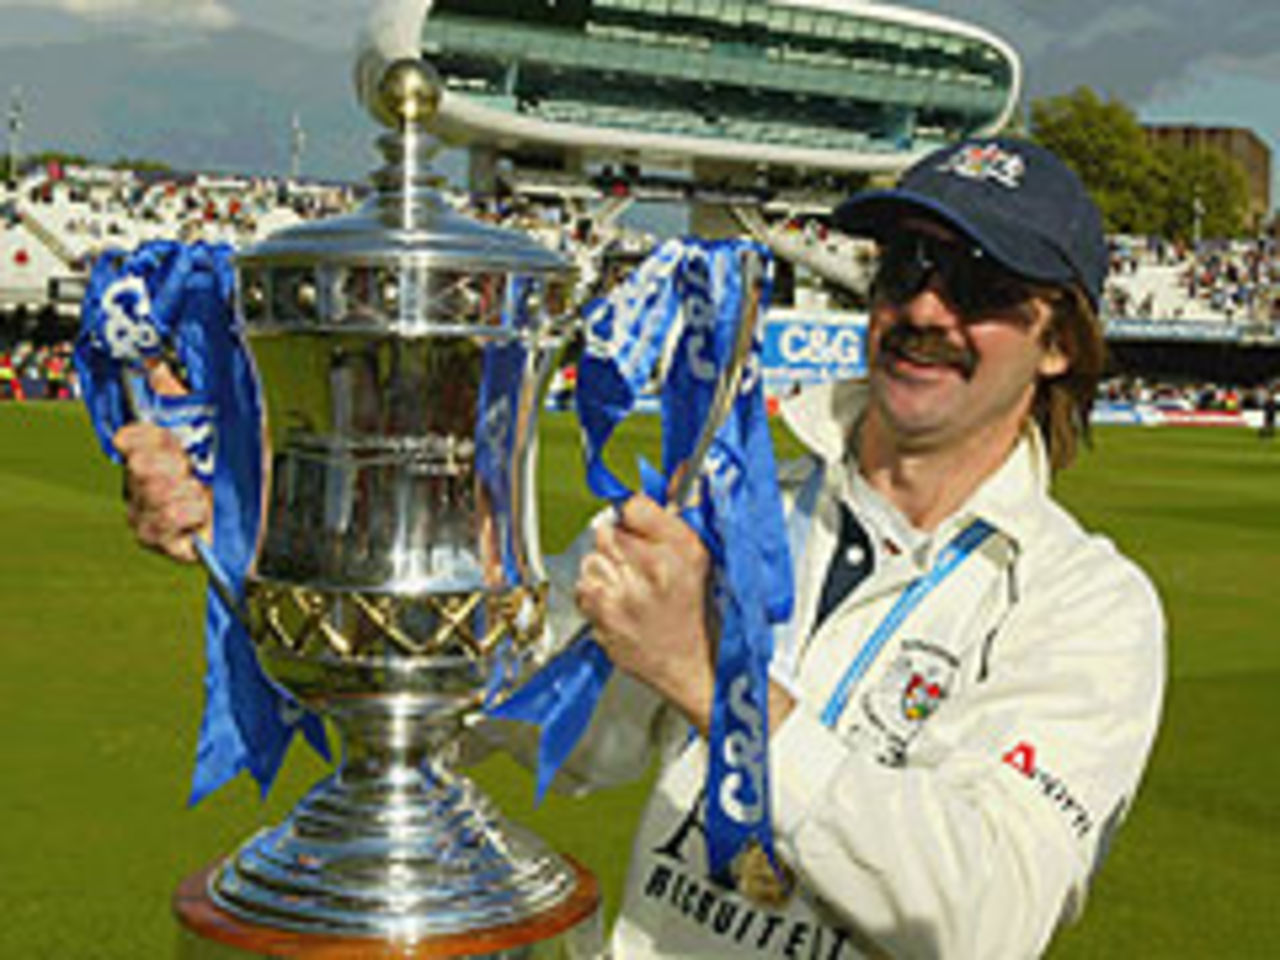 Jack Russell parades the C&G Trophy after Gloucestershire crushed Worcestershire at Lord's